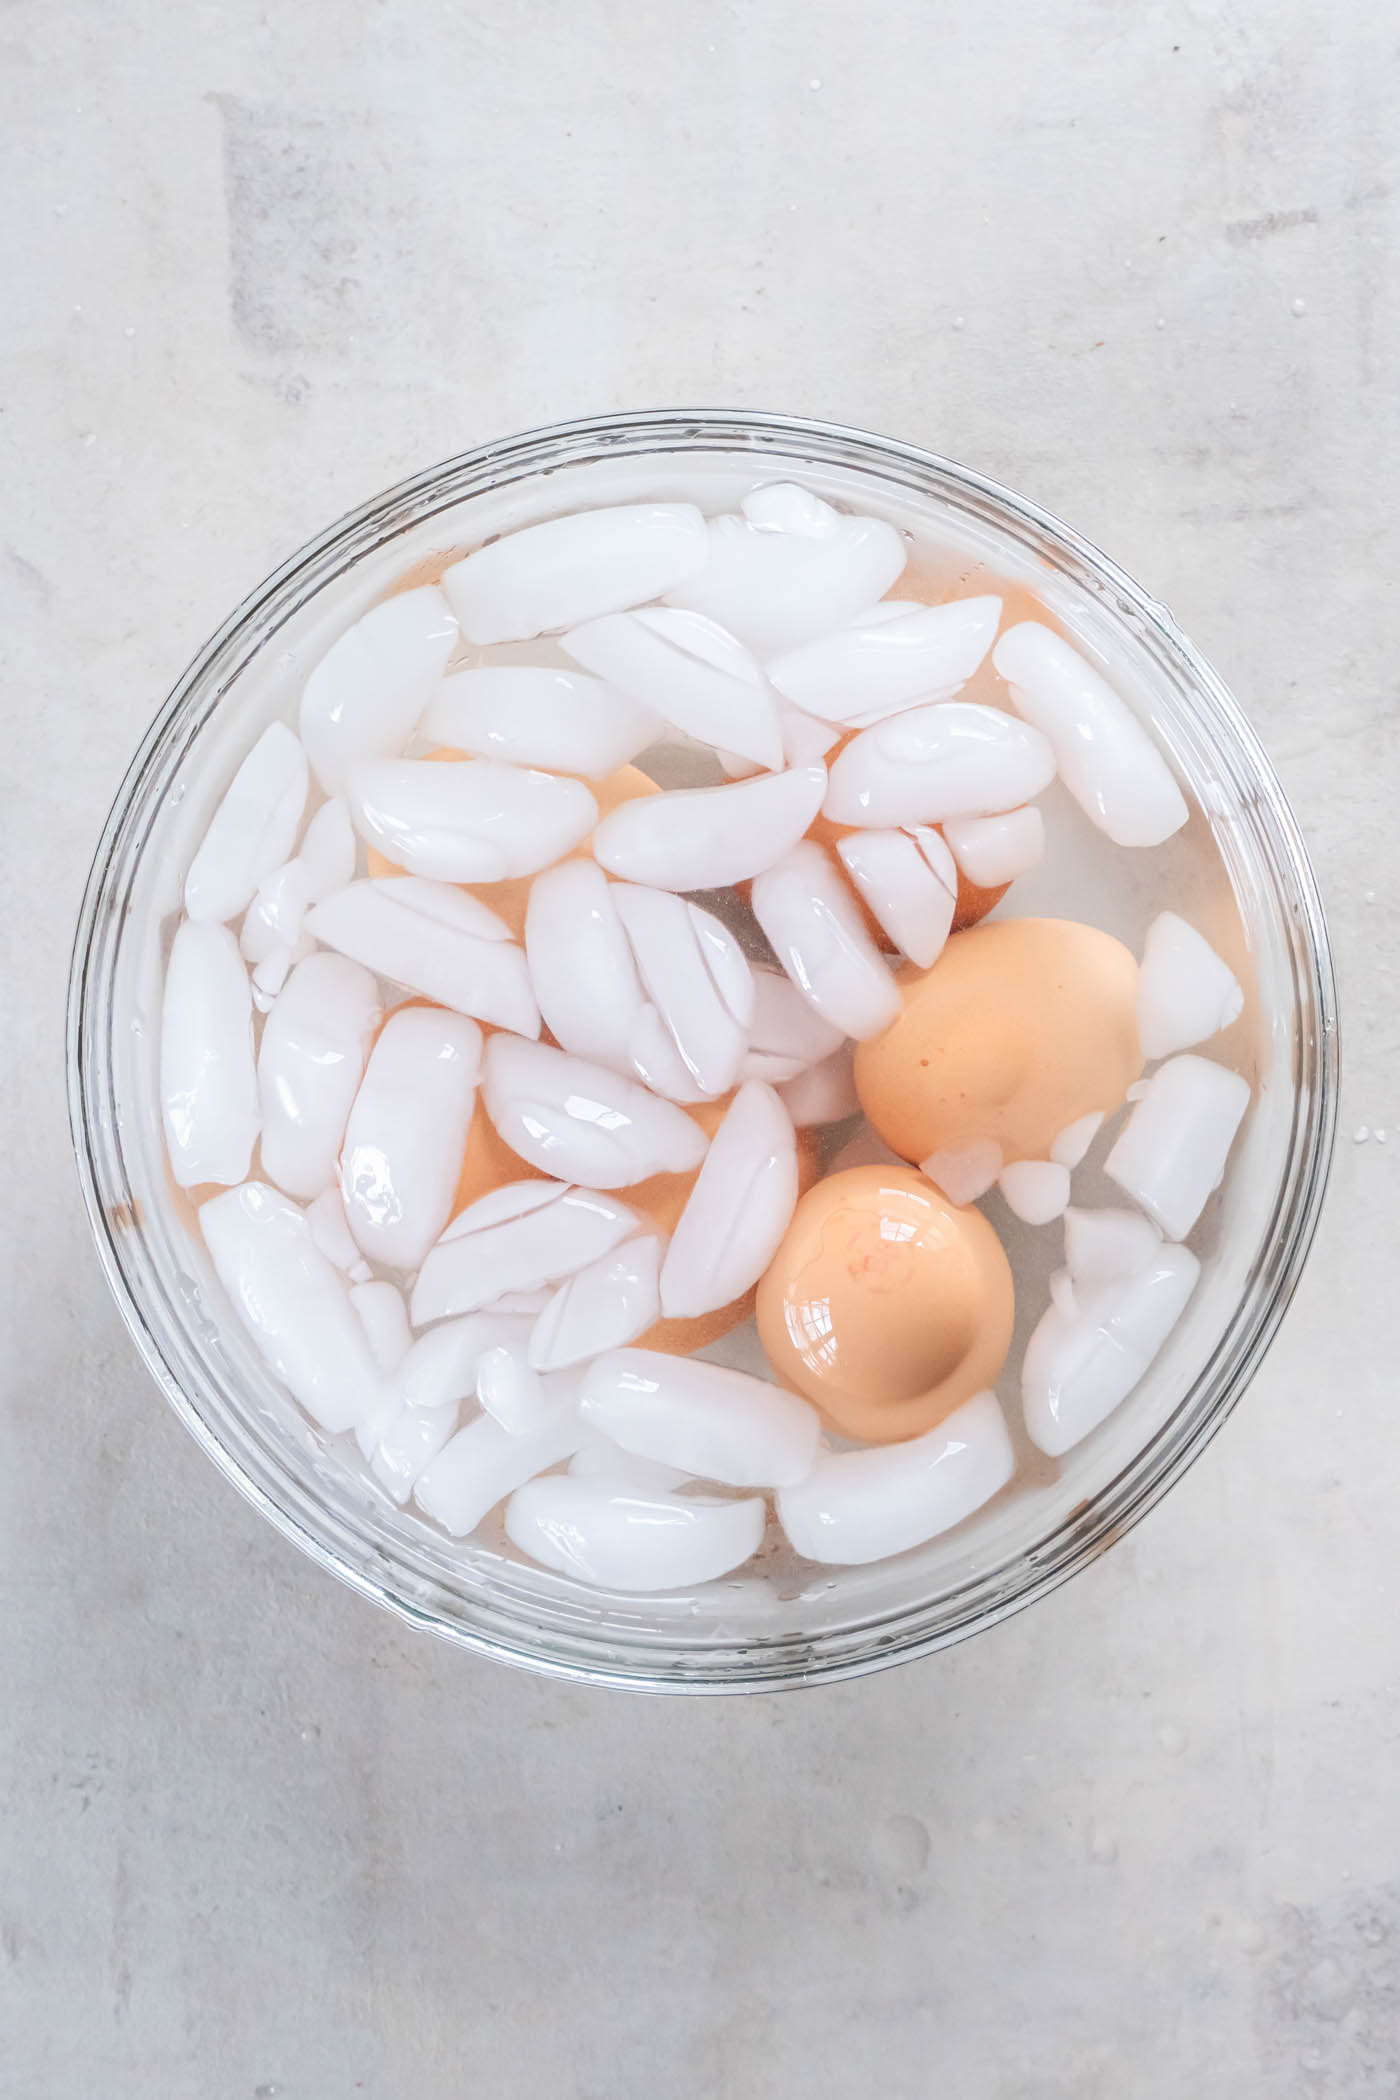 Hard boiled eggs in bowl of ice water.